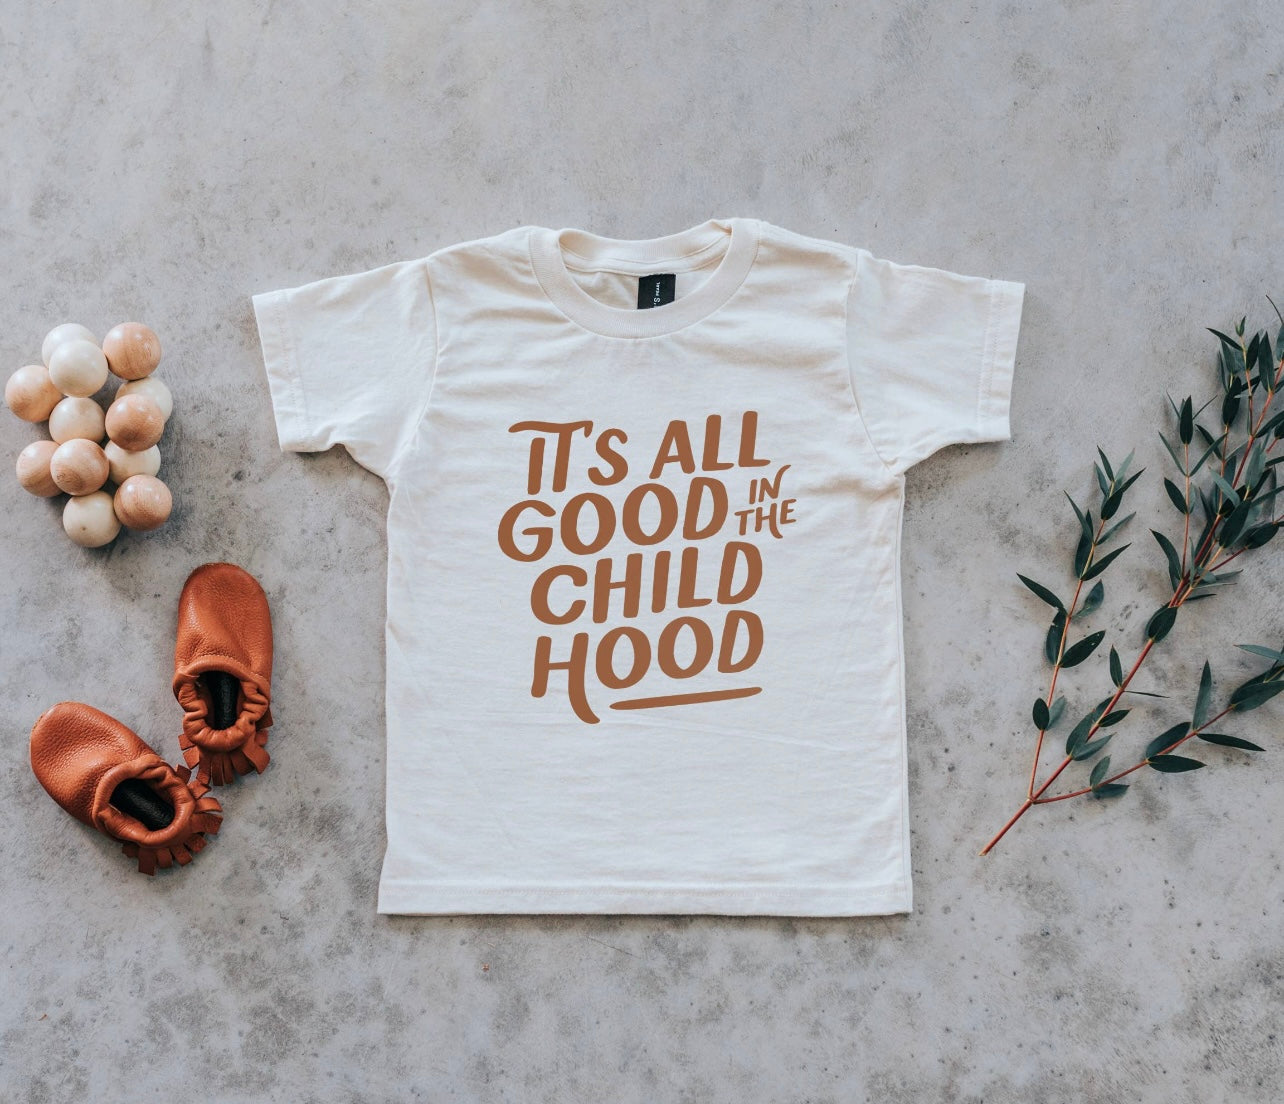 "It's all good in the childhood" 100% Organic Cotton Tee